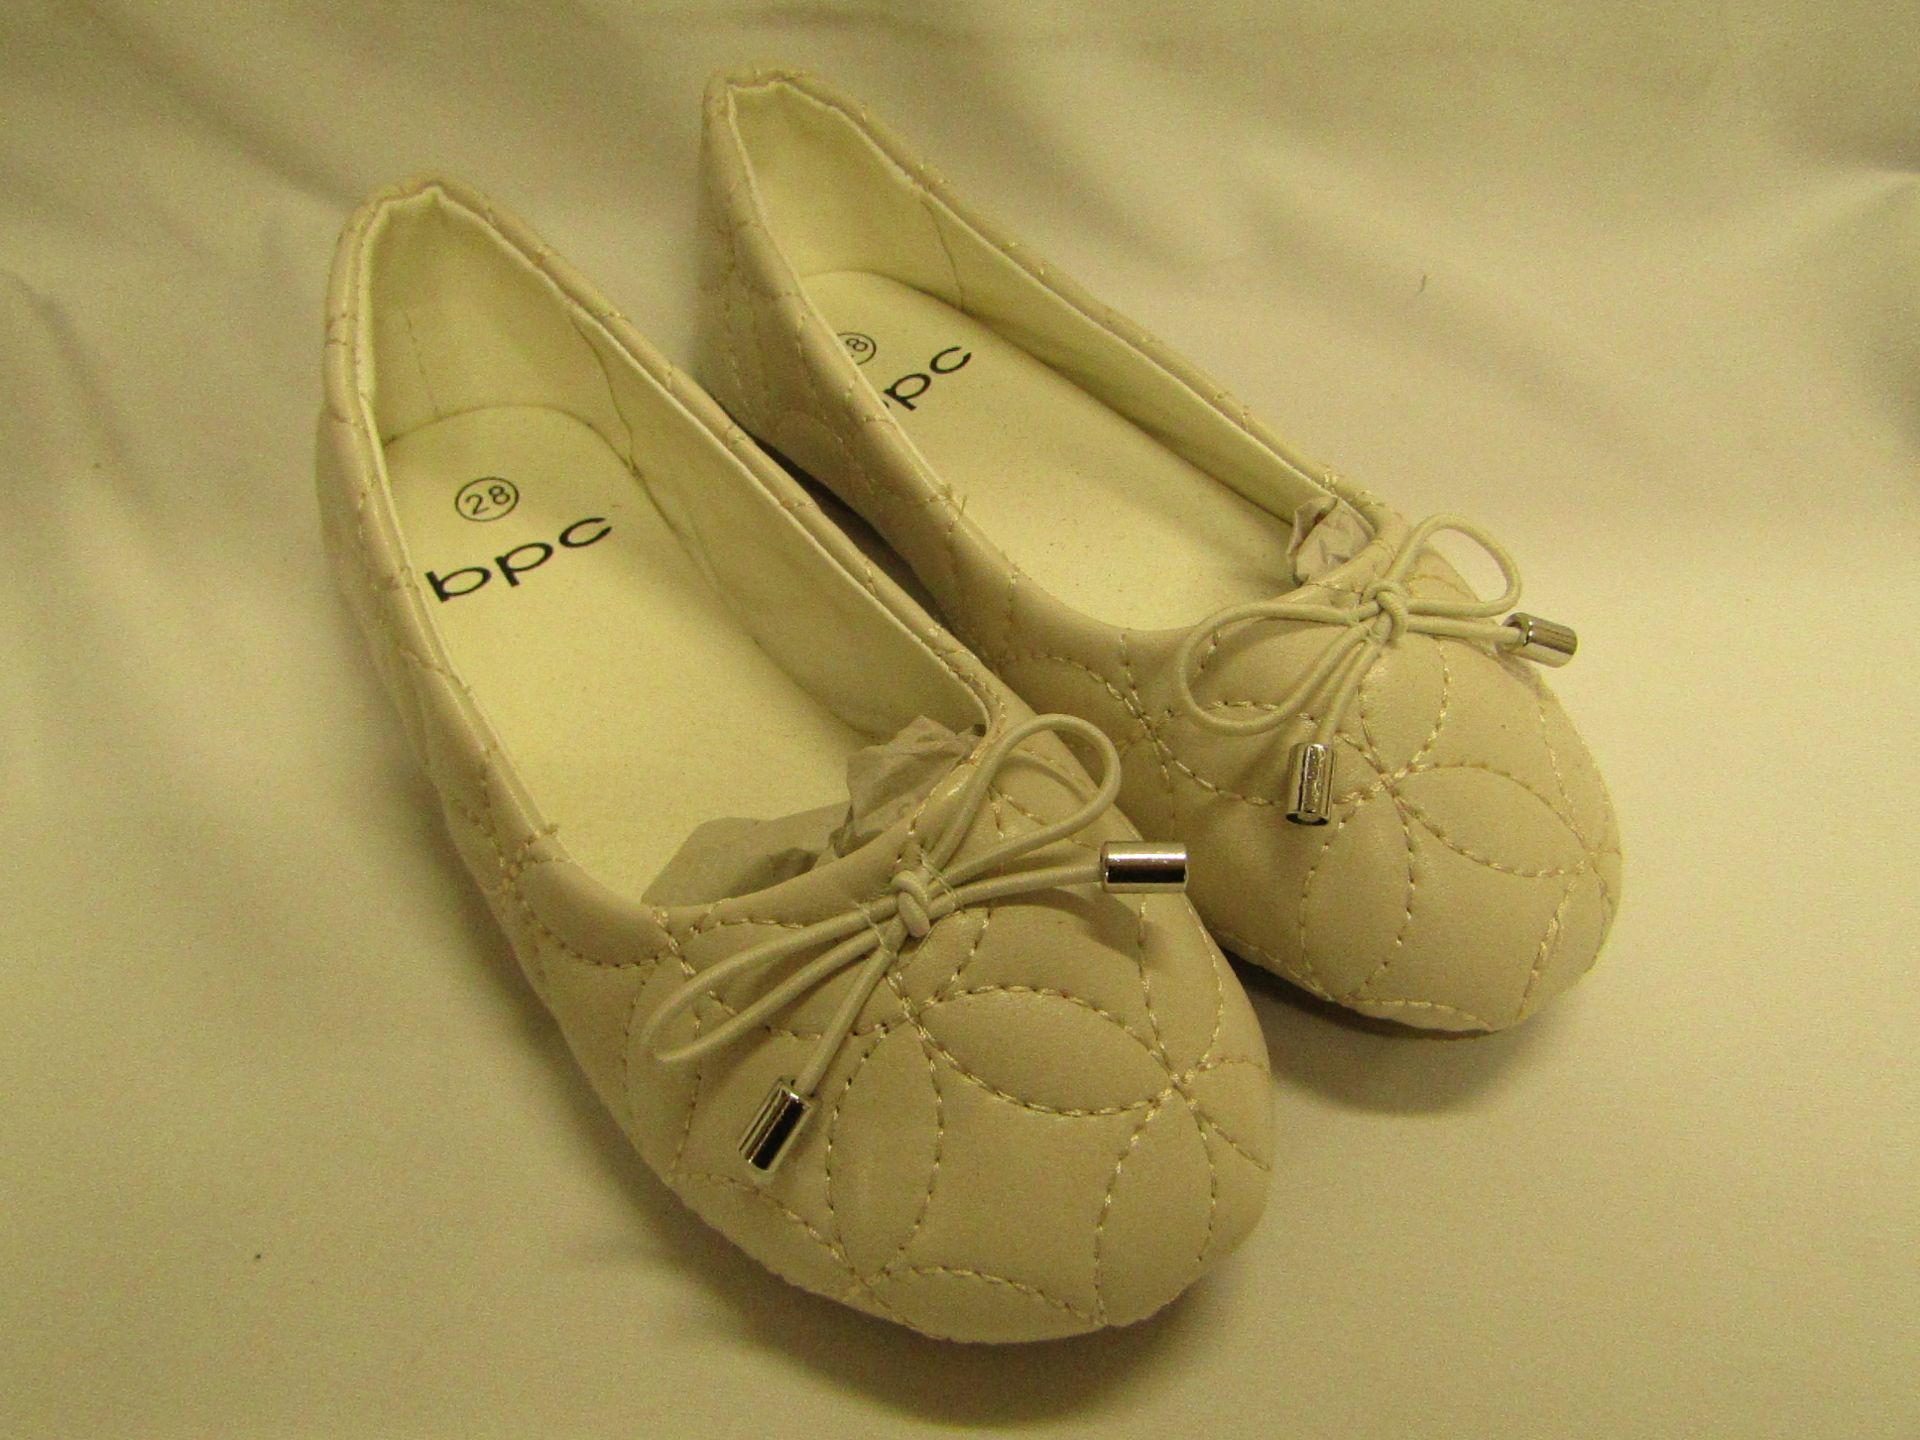 BPC White Ballet Pumps Size 28 New & Packaged